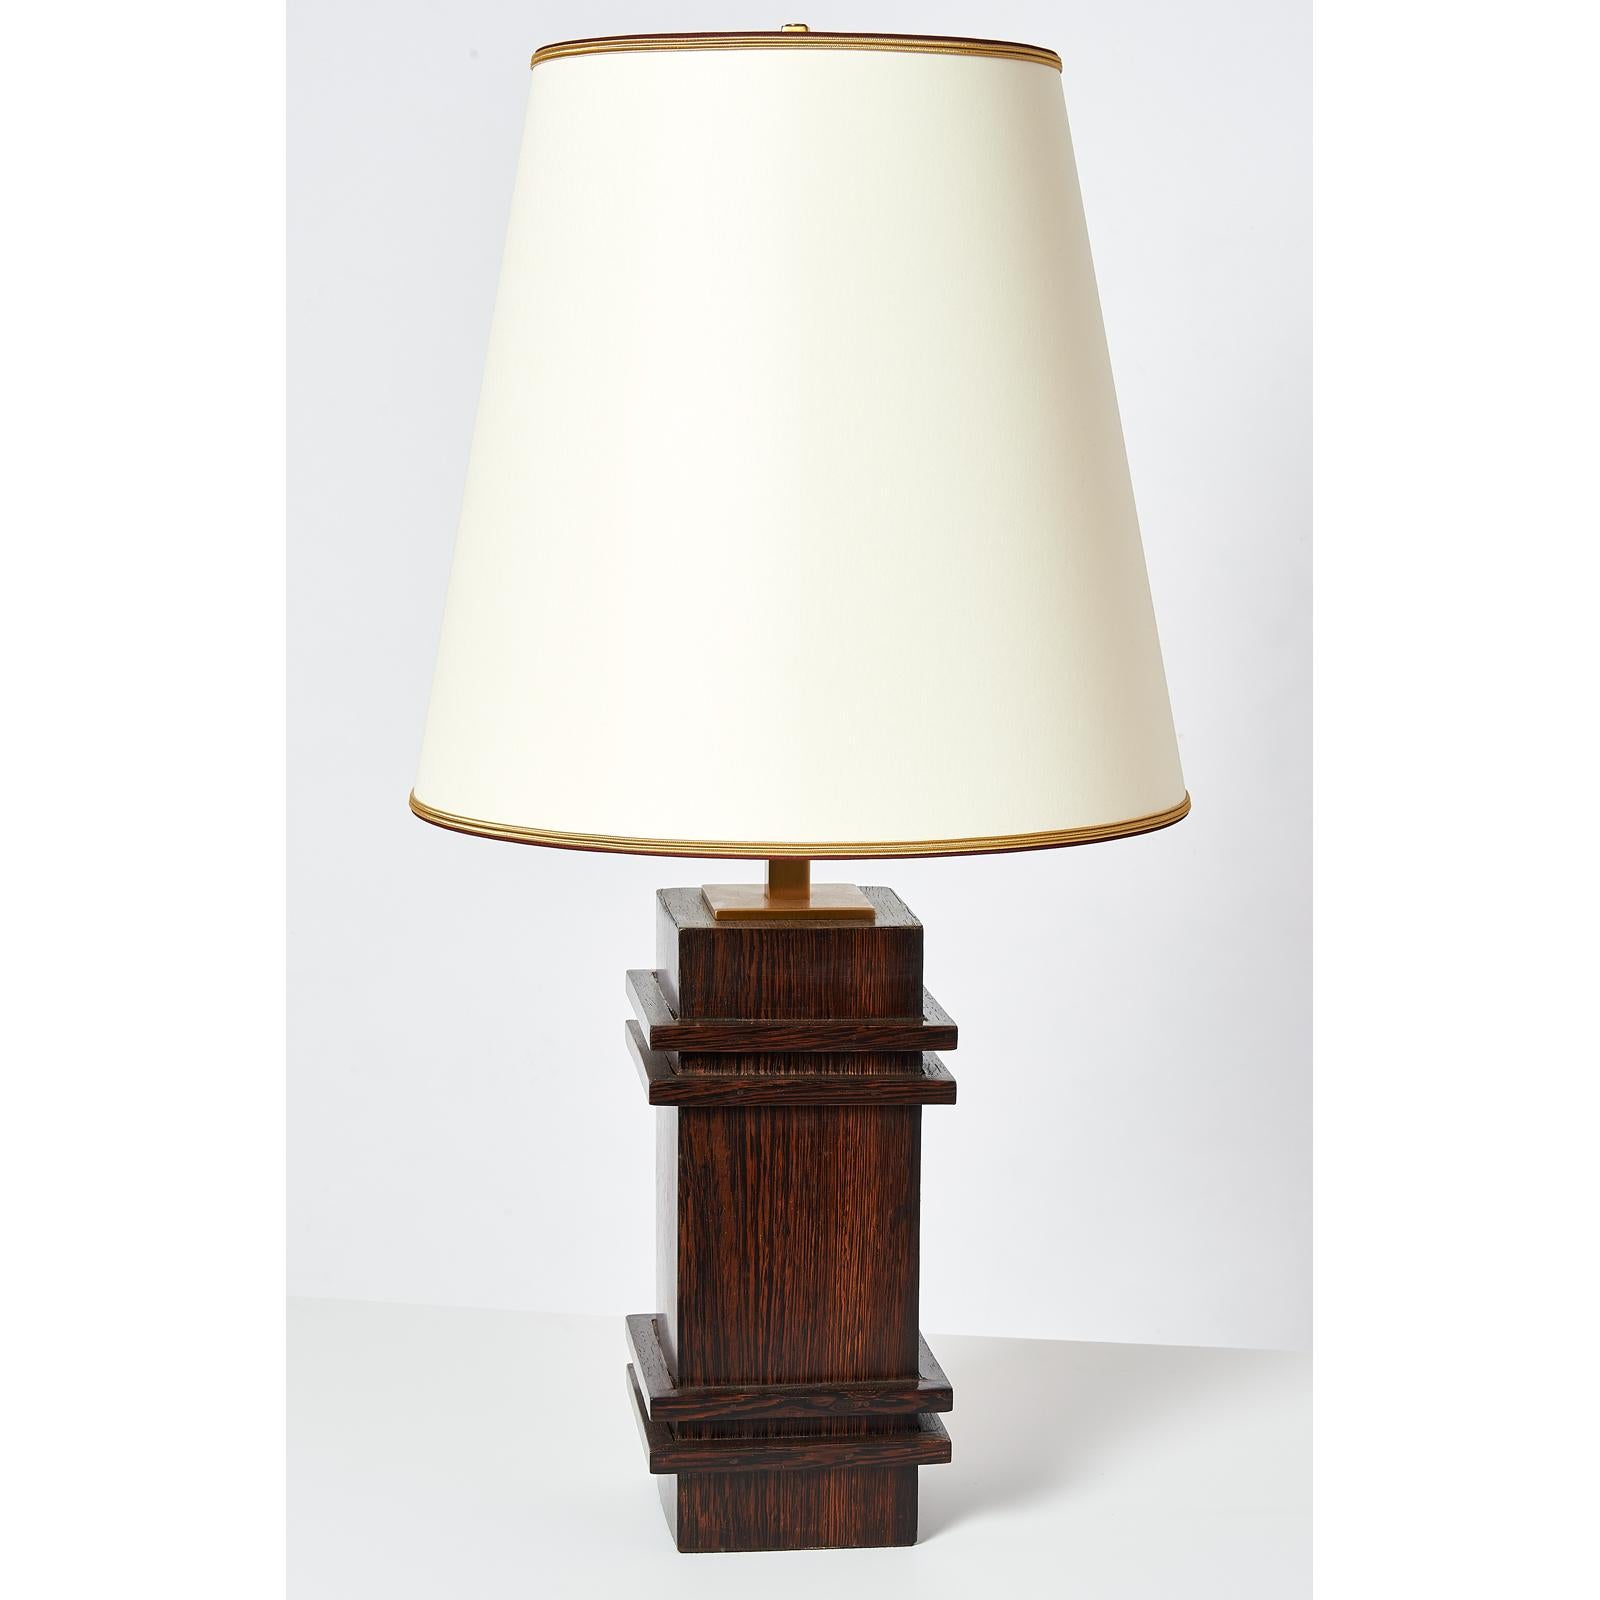 France, 1950s
Sculptural palm wood table lamp, att. to Jacques Adnet
Dimensions: 32 H x 16 Ø
Rewired for use in the USA with two standard base bulbs.
Ref: Alain-Rene Hardy  Jacques Adnet book  p.243 
Available with round or square shade